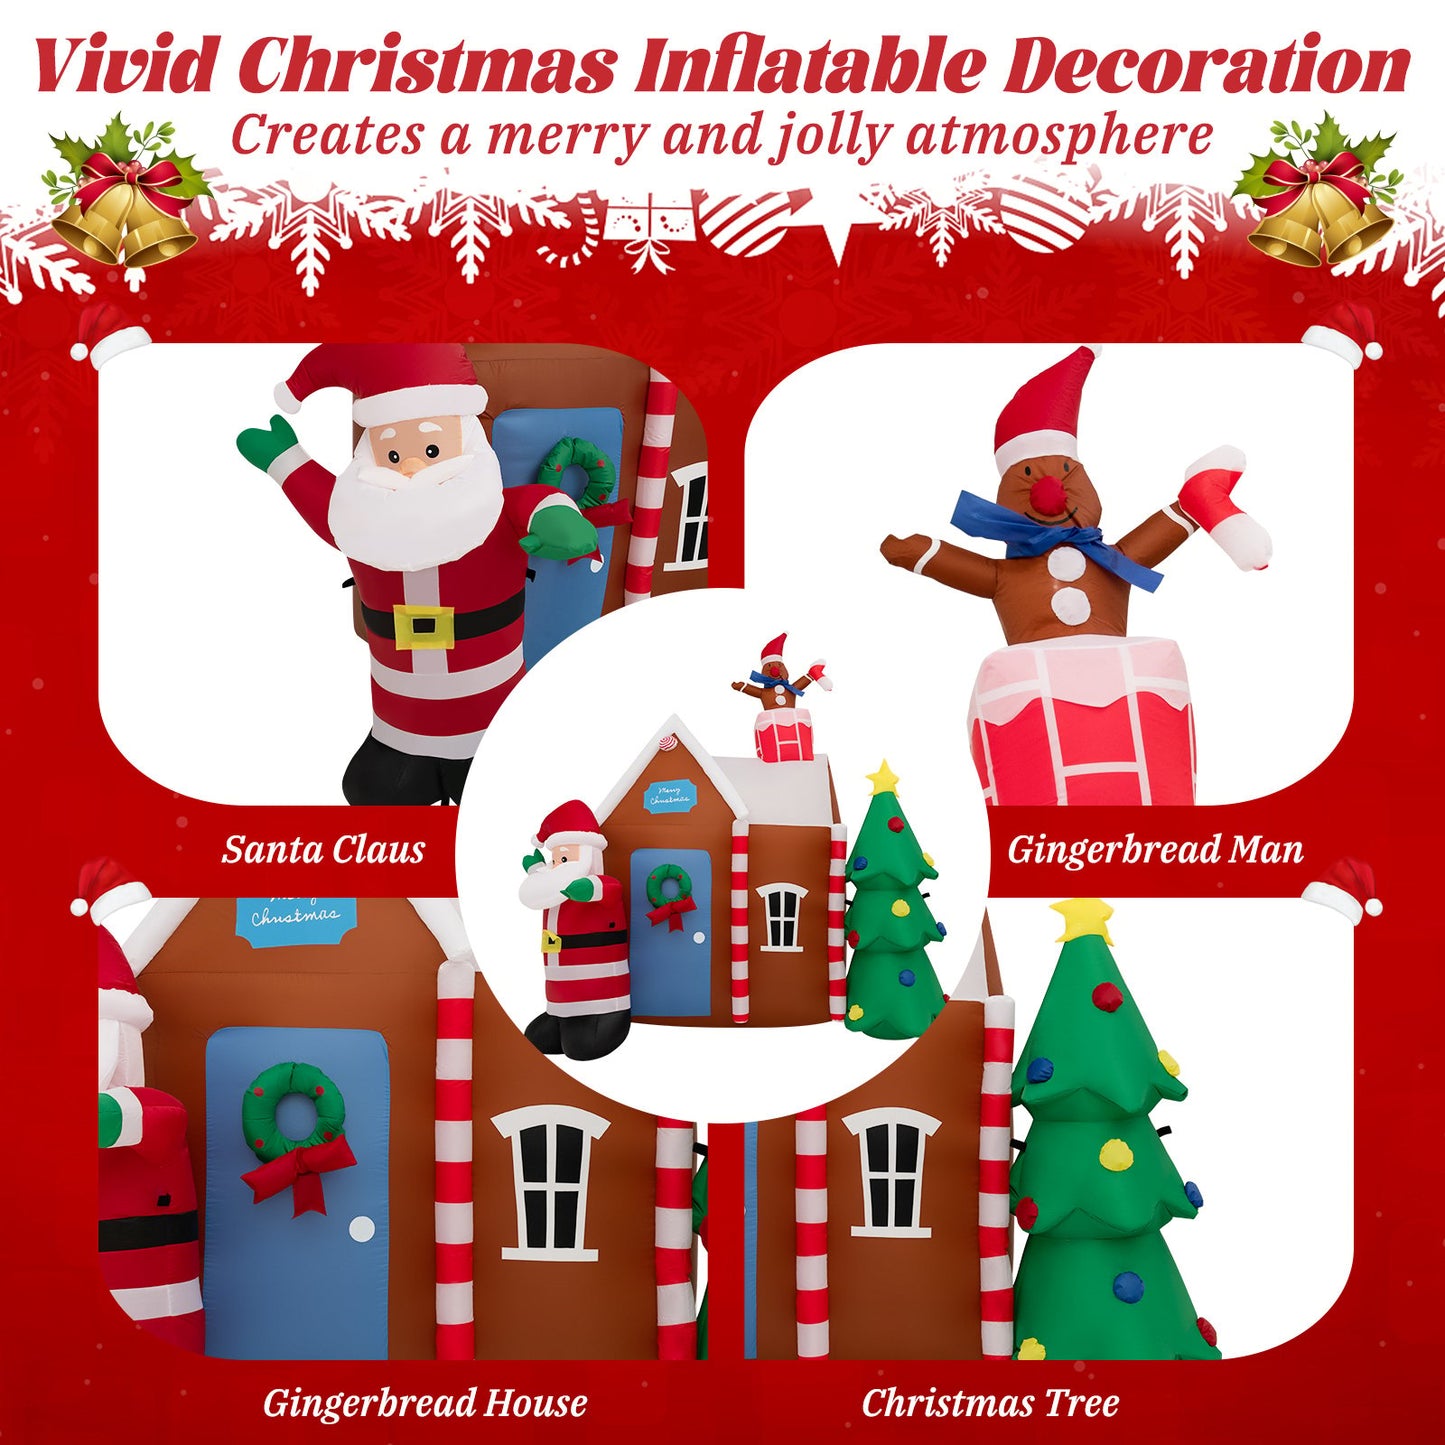 7 Feet Christmas Inflatable Ginger House, Multicolor - Gallery Canada